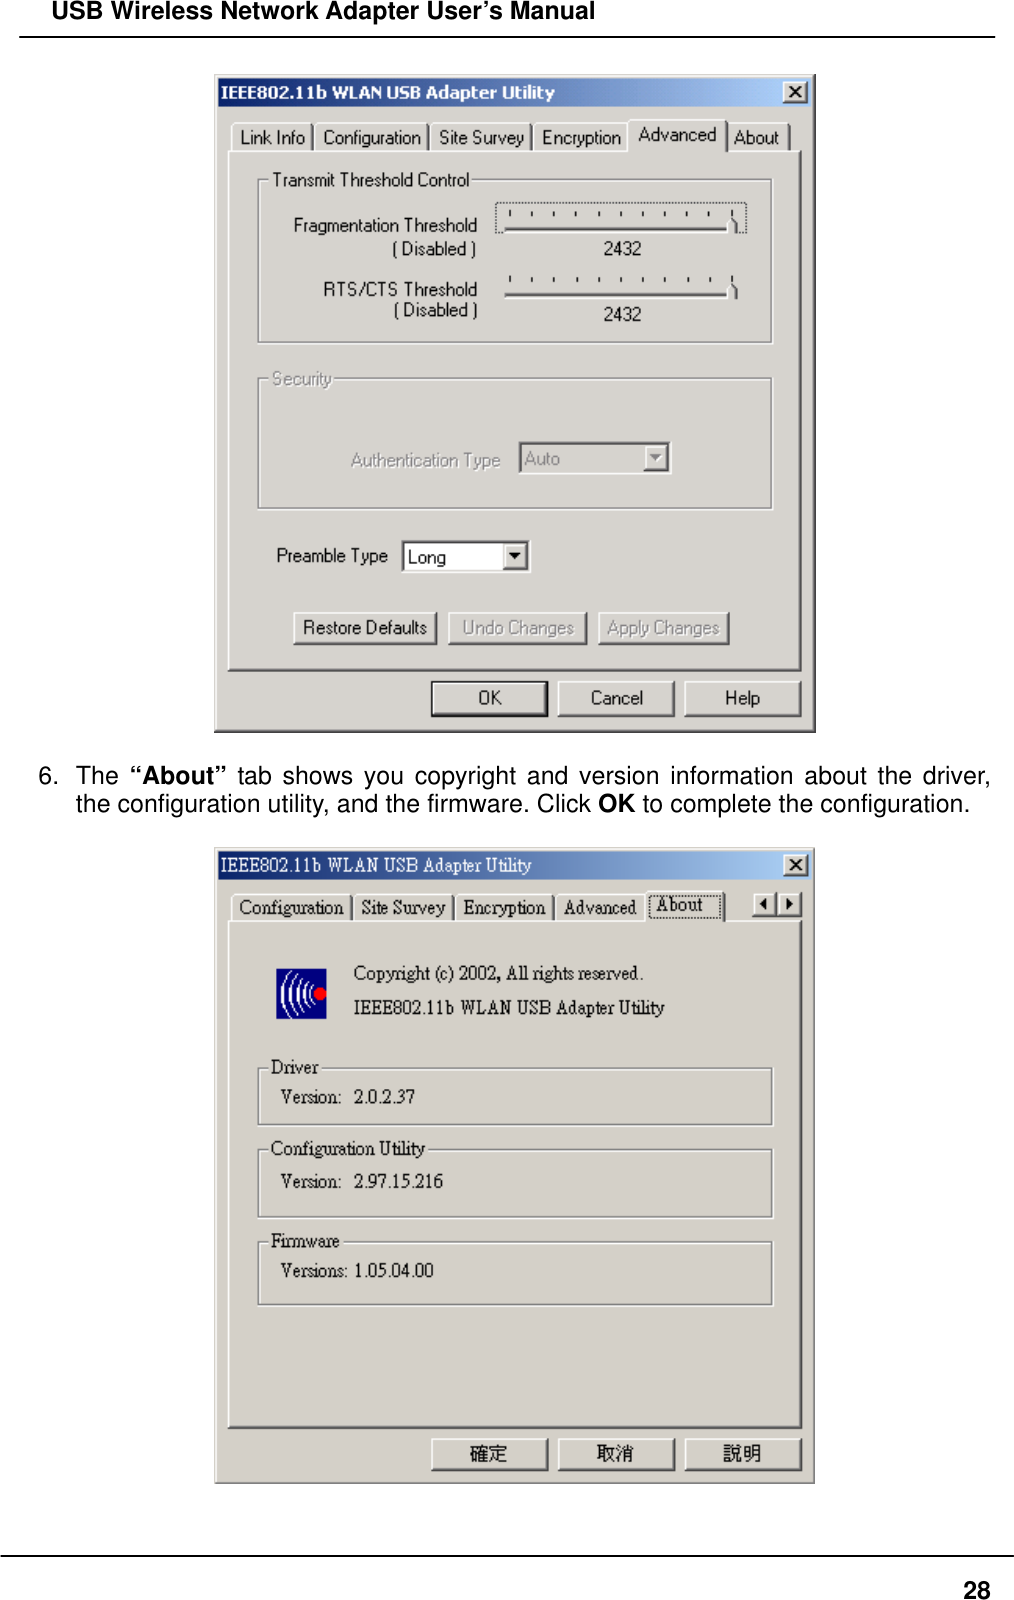   USB Wireless Network Adapter User’s Manual   6. The “About” tab shows you copyright and version information about the driver, the configuration utility, and the firmware. Click OK to complete the configuration.     28